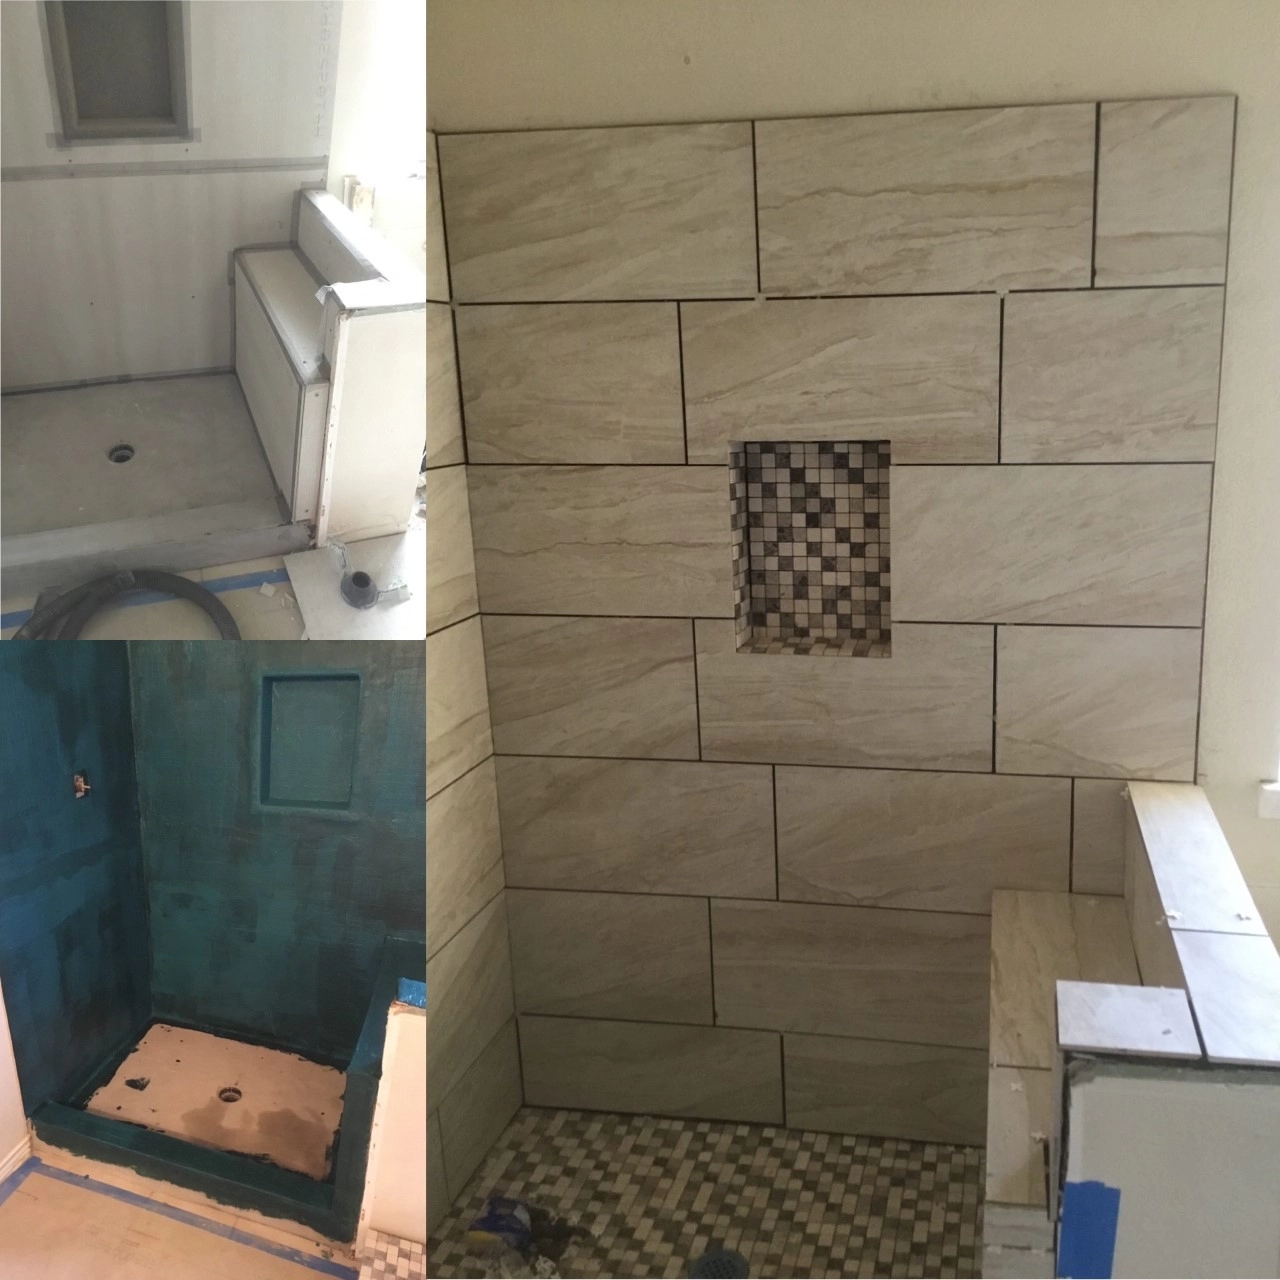 Multiple stages of tile installation being completed for a shower remodel in Denton, TX.